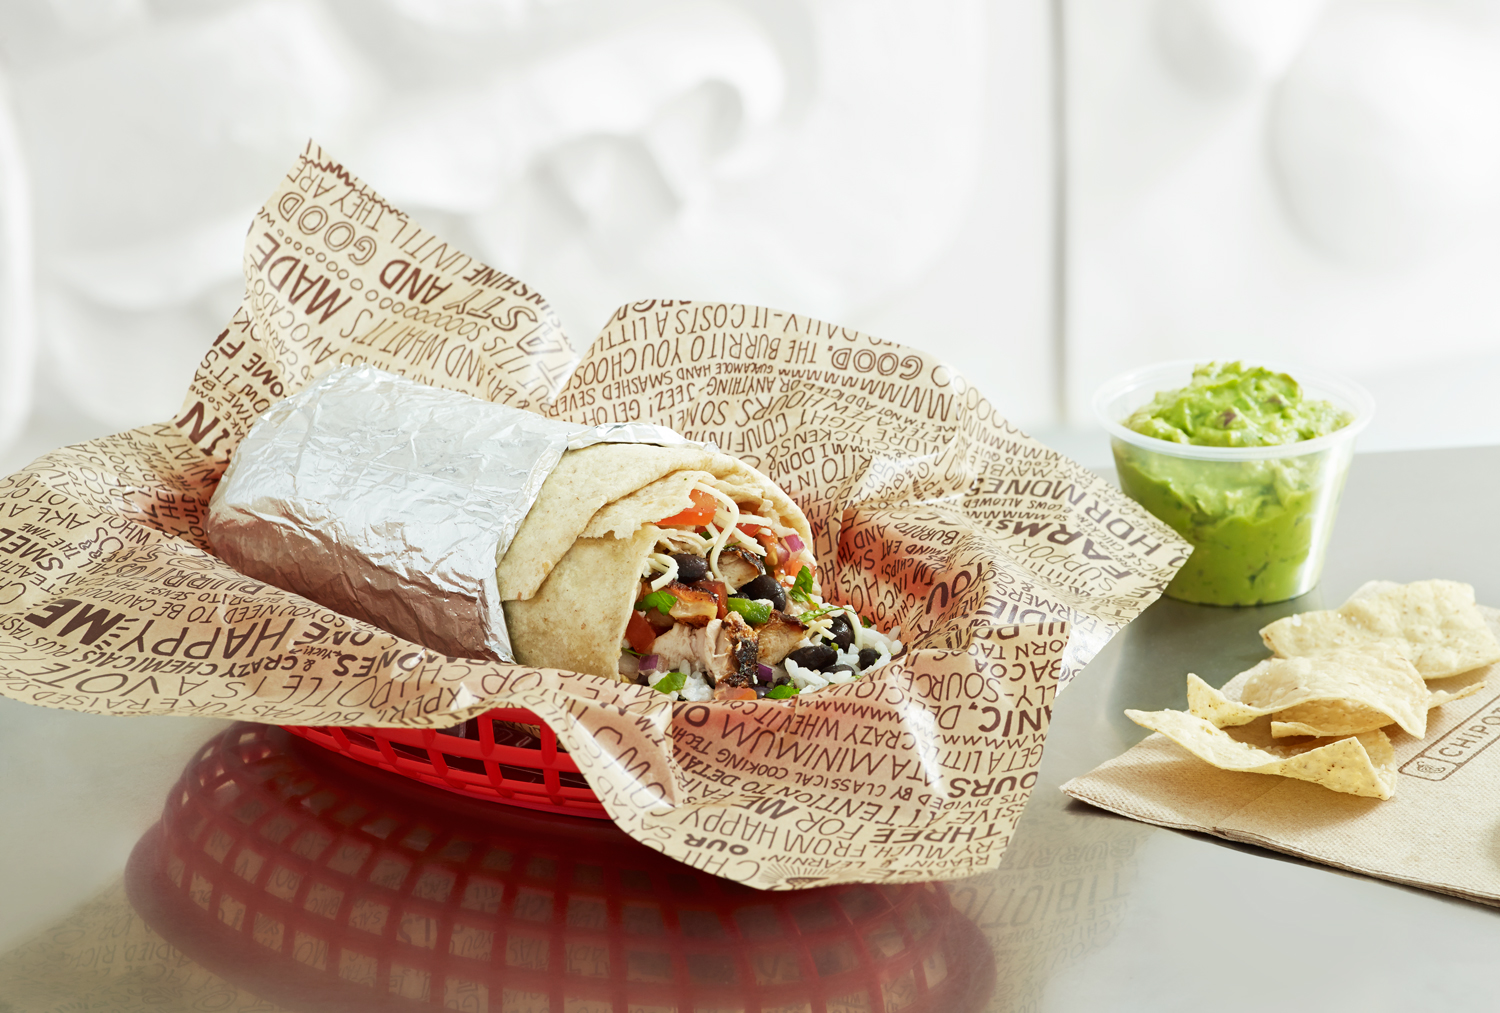 Chipotle is giving away free burritos during NBA finals How to get yours